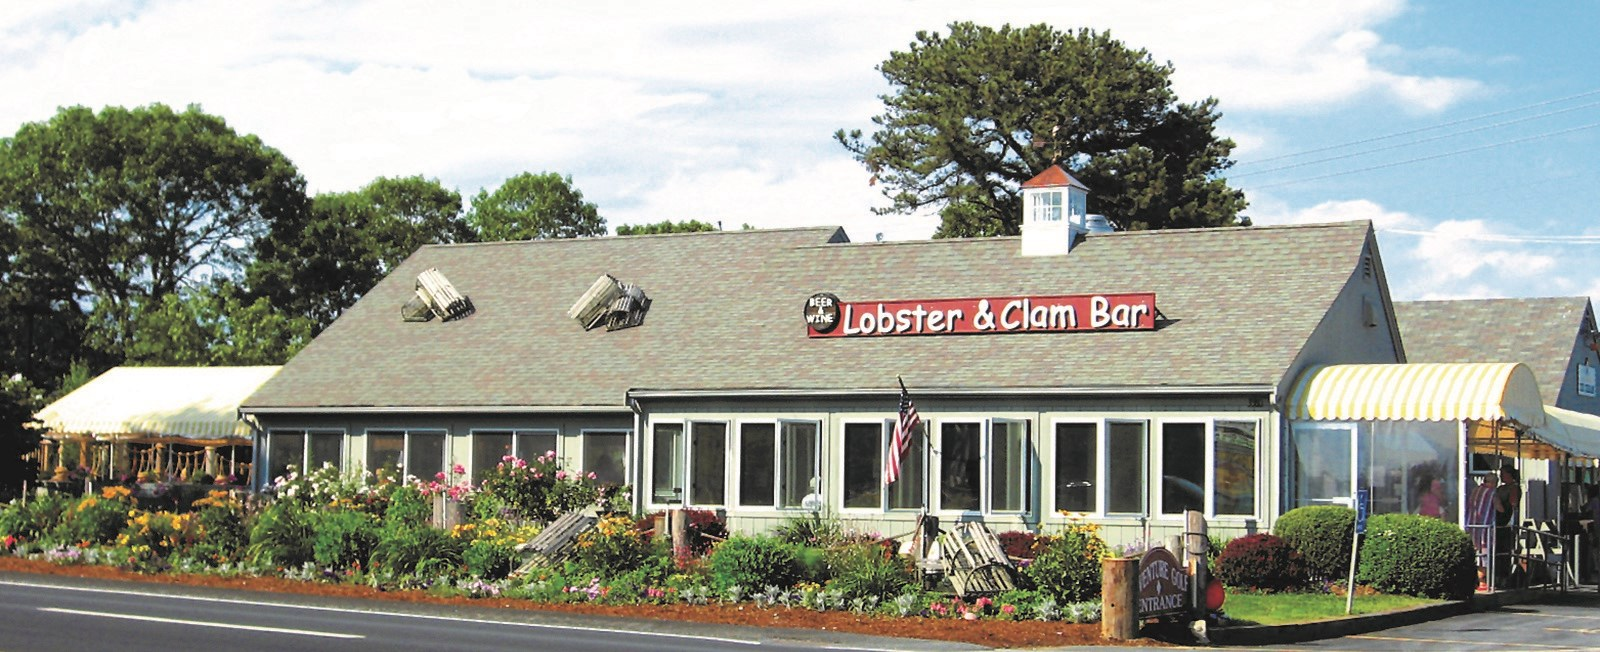 Arnold's Lobster & Clam Bar in Eastham has been serving Nauset Rental guests the best clams in the world for over 45 years